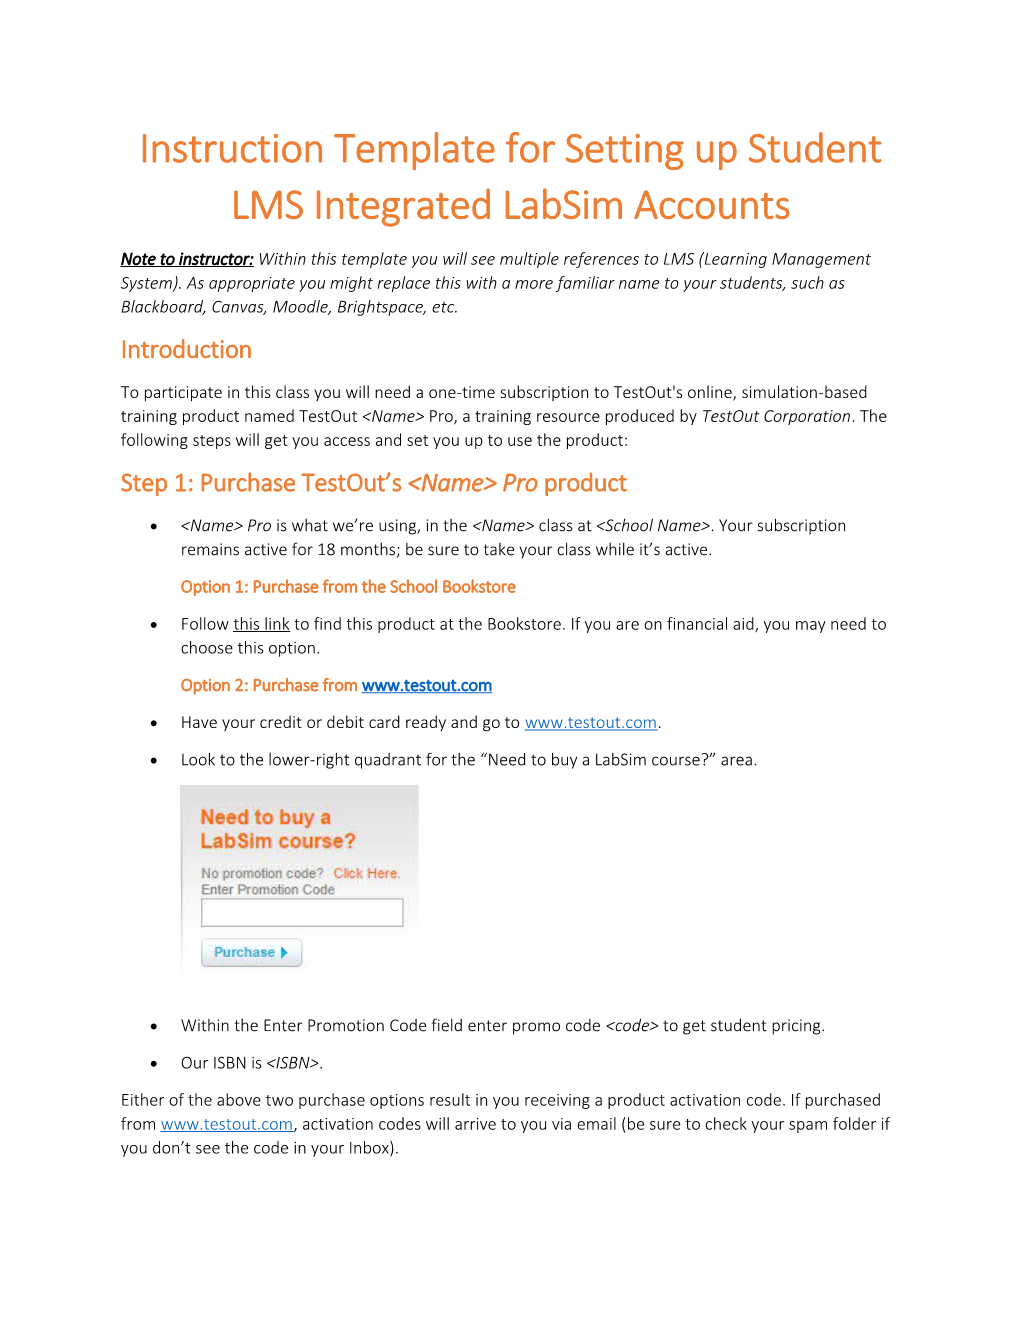 Instruction Template for Setting up Student LMS Integrated Labsim Accounts